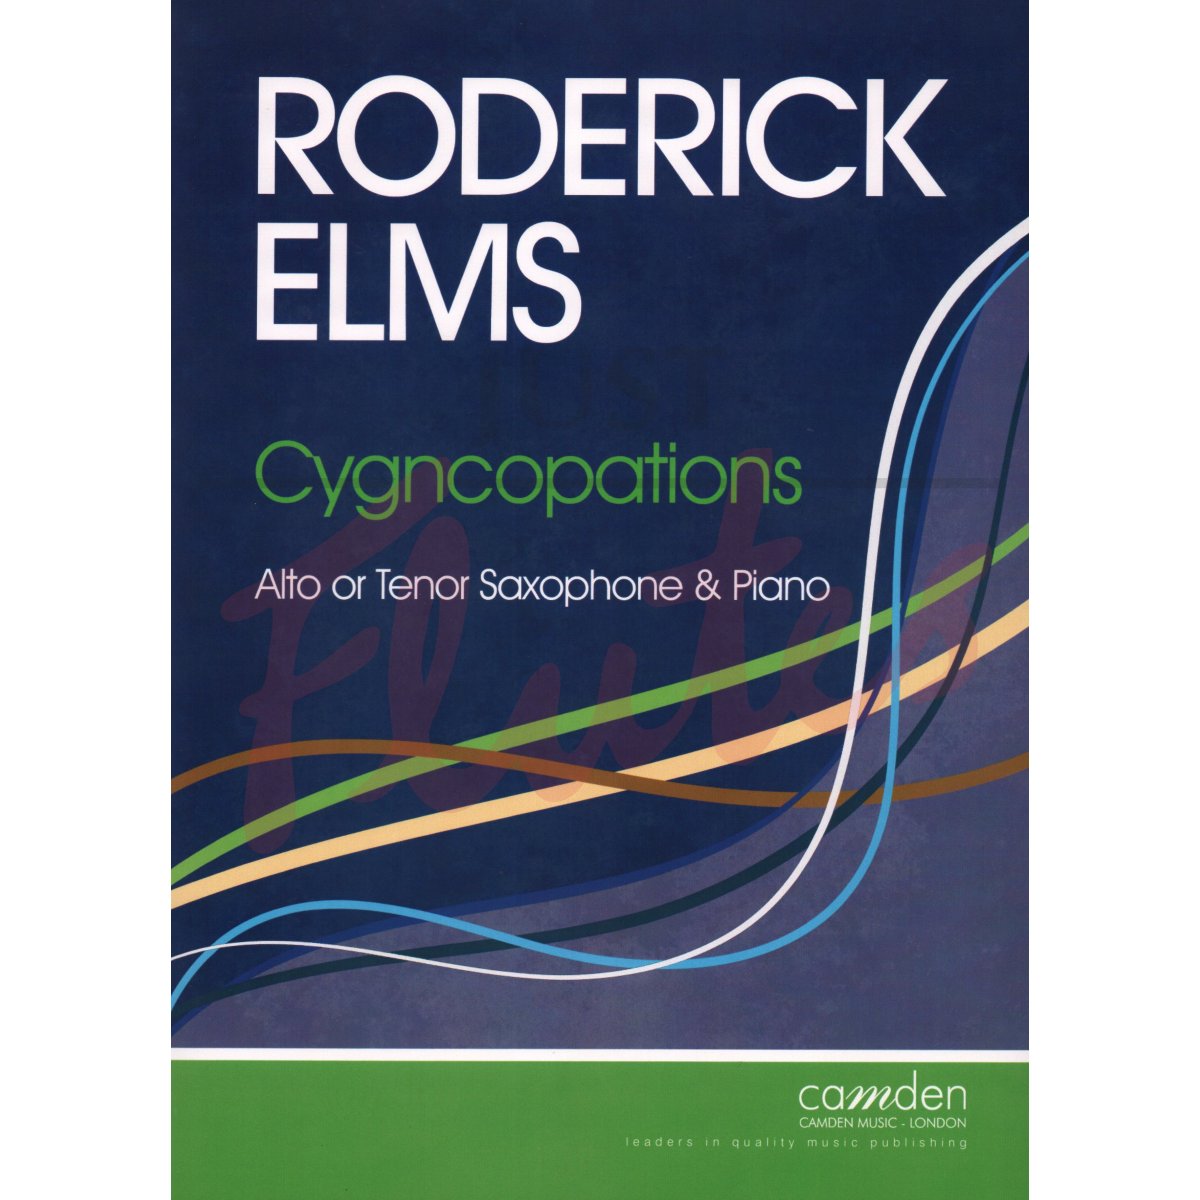 Cygncopations for Alto or Tenor Saxophone and Piano